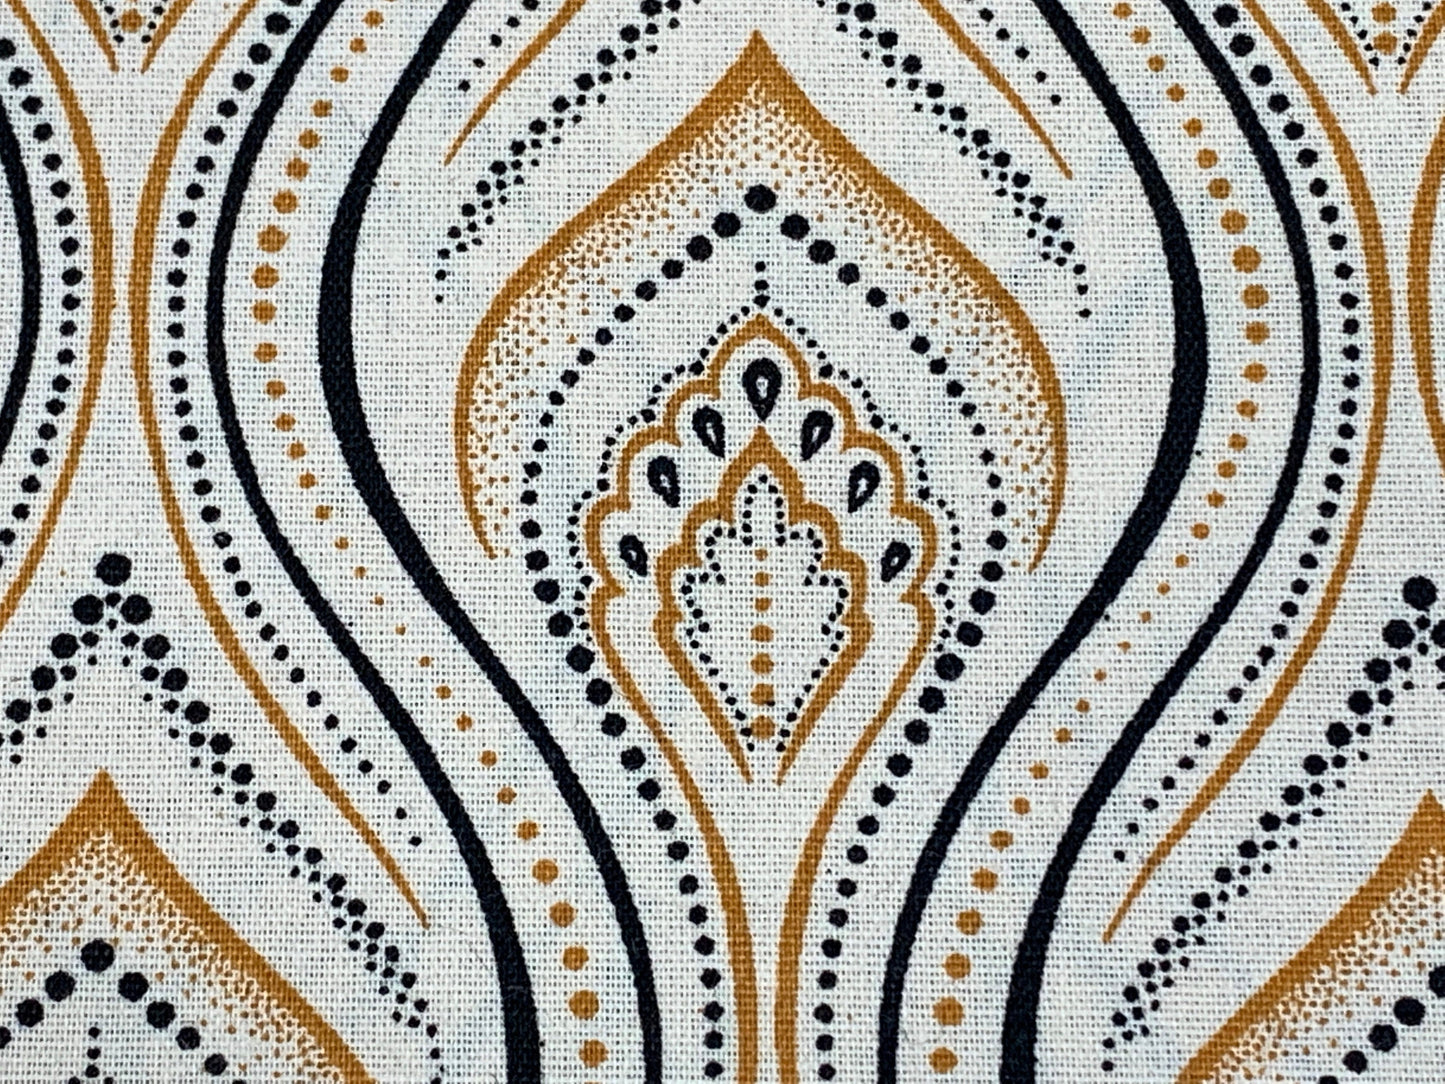 South African Shweshwe Fabric by the YARD. DaGama Three Cats Minarets Peaches & Cream. Cotton Fabric for Quilting, Apparel, Home Decor.